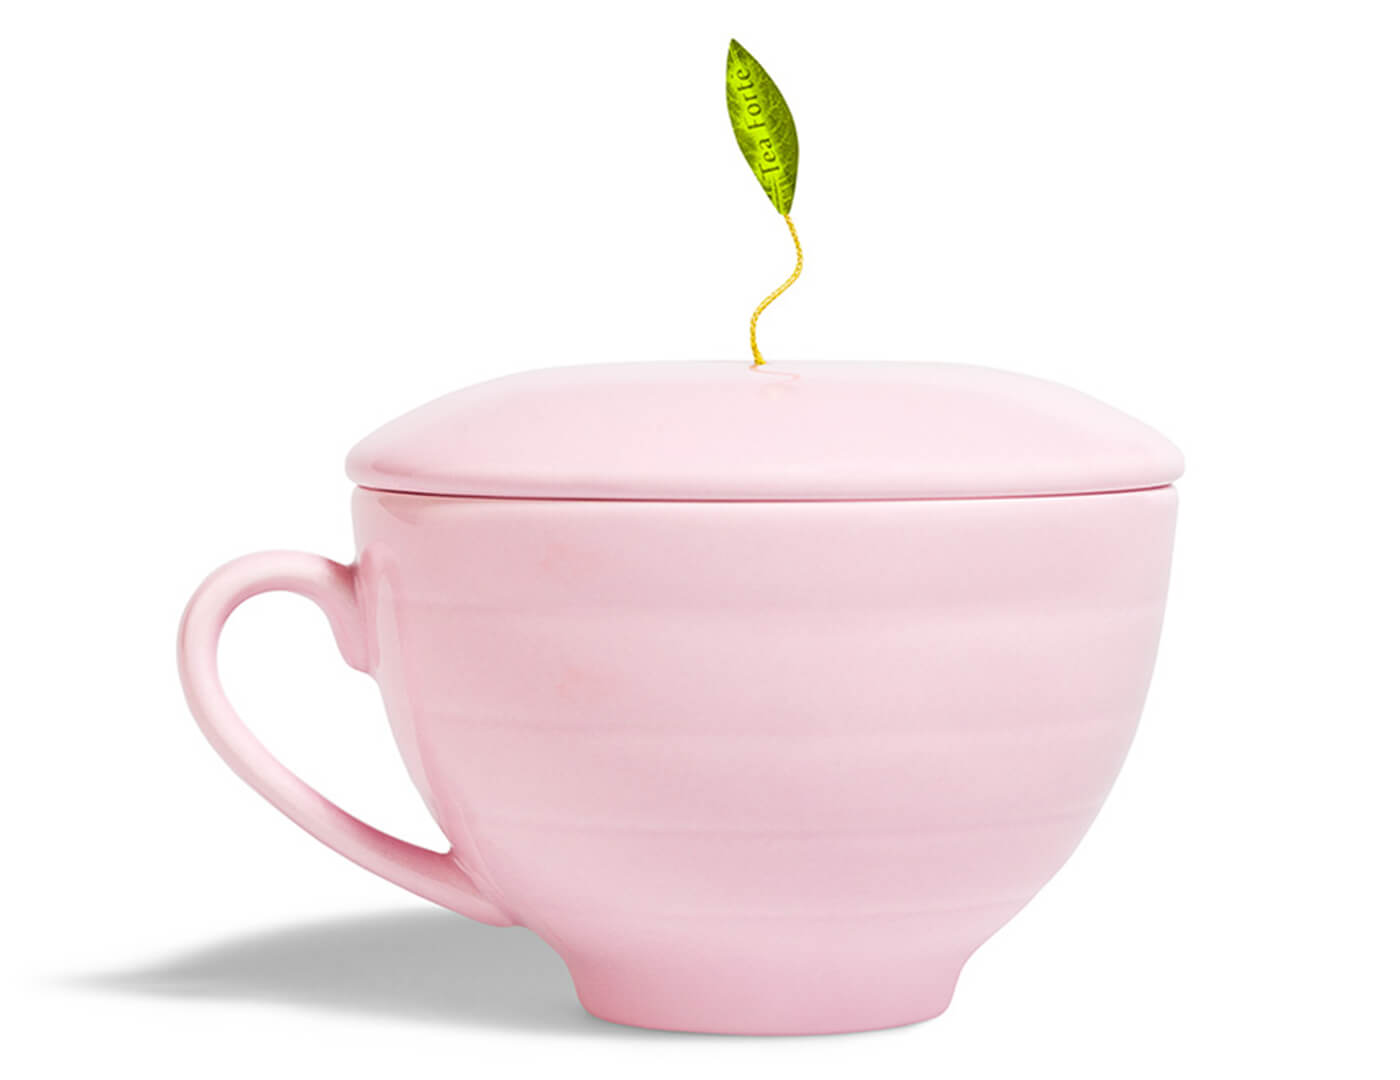 Pink Café Cup with lid and tea infuser leaf peeking out of the top.